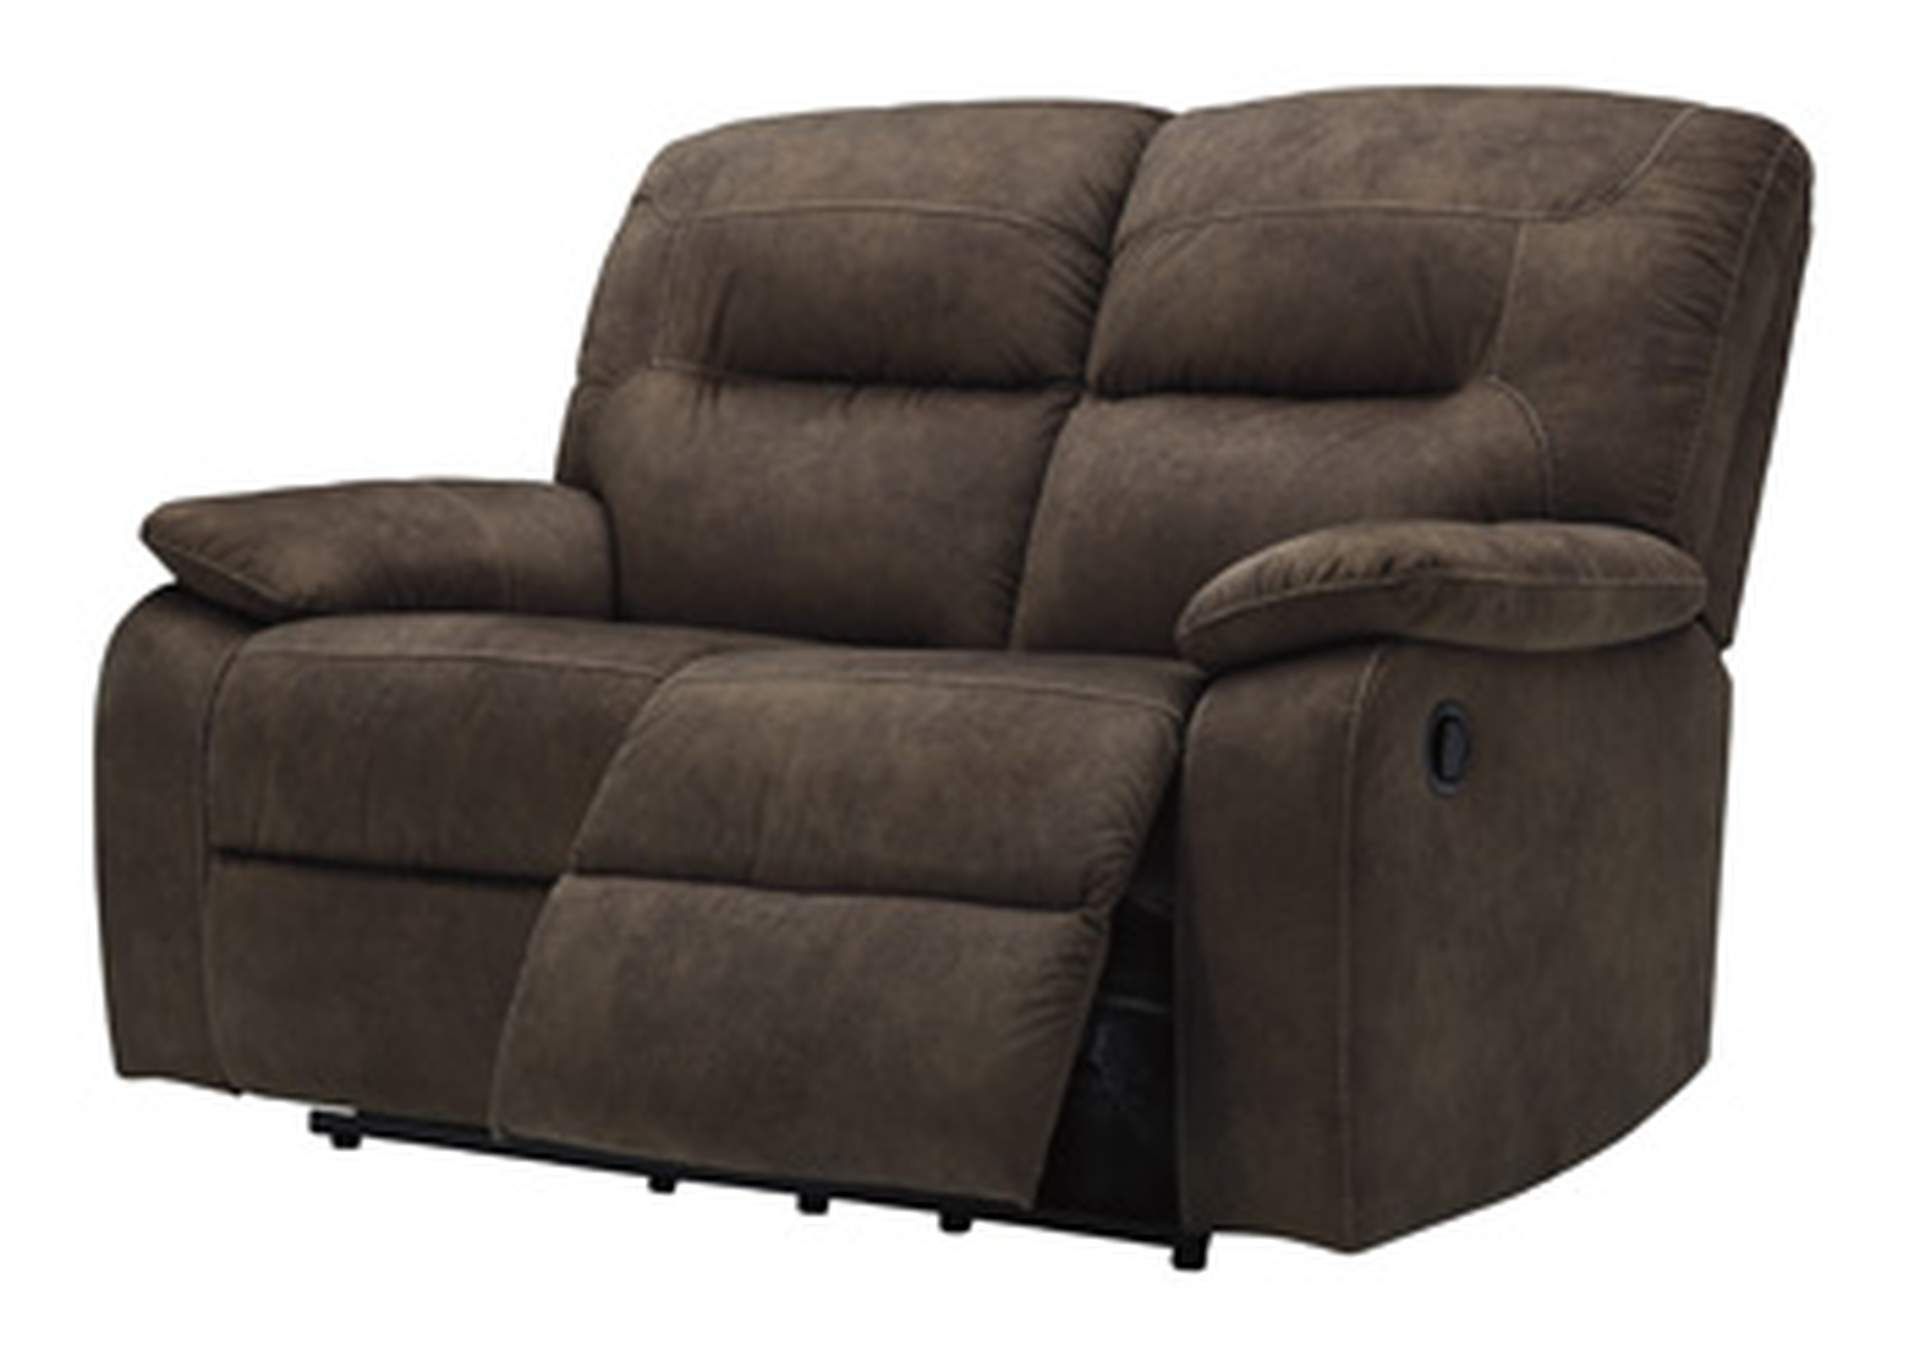 Brown/beige Bolzano Reclining Loveseat Spiller Furniture & Mattress Intended For Round Blue Faux Leather Ottomans With Pull Tab (View 2 of 20)